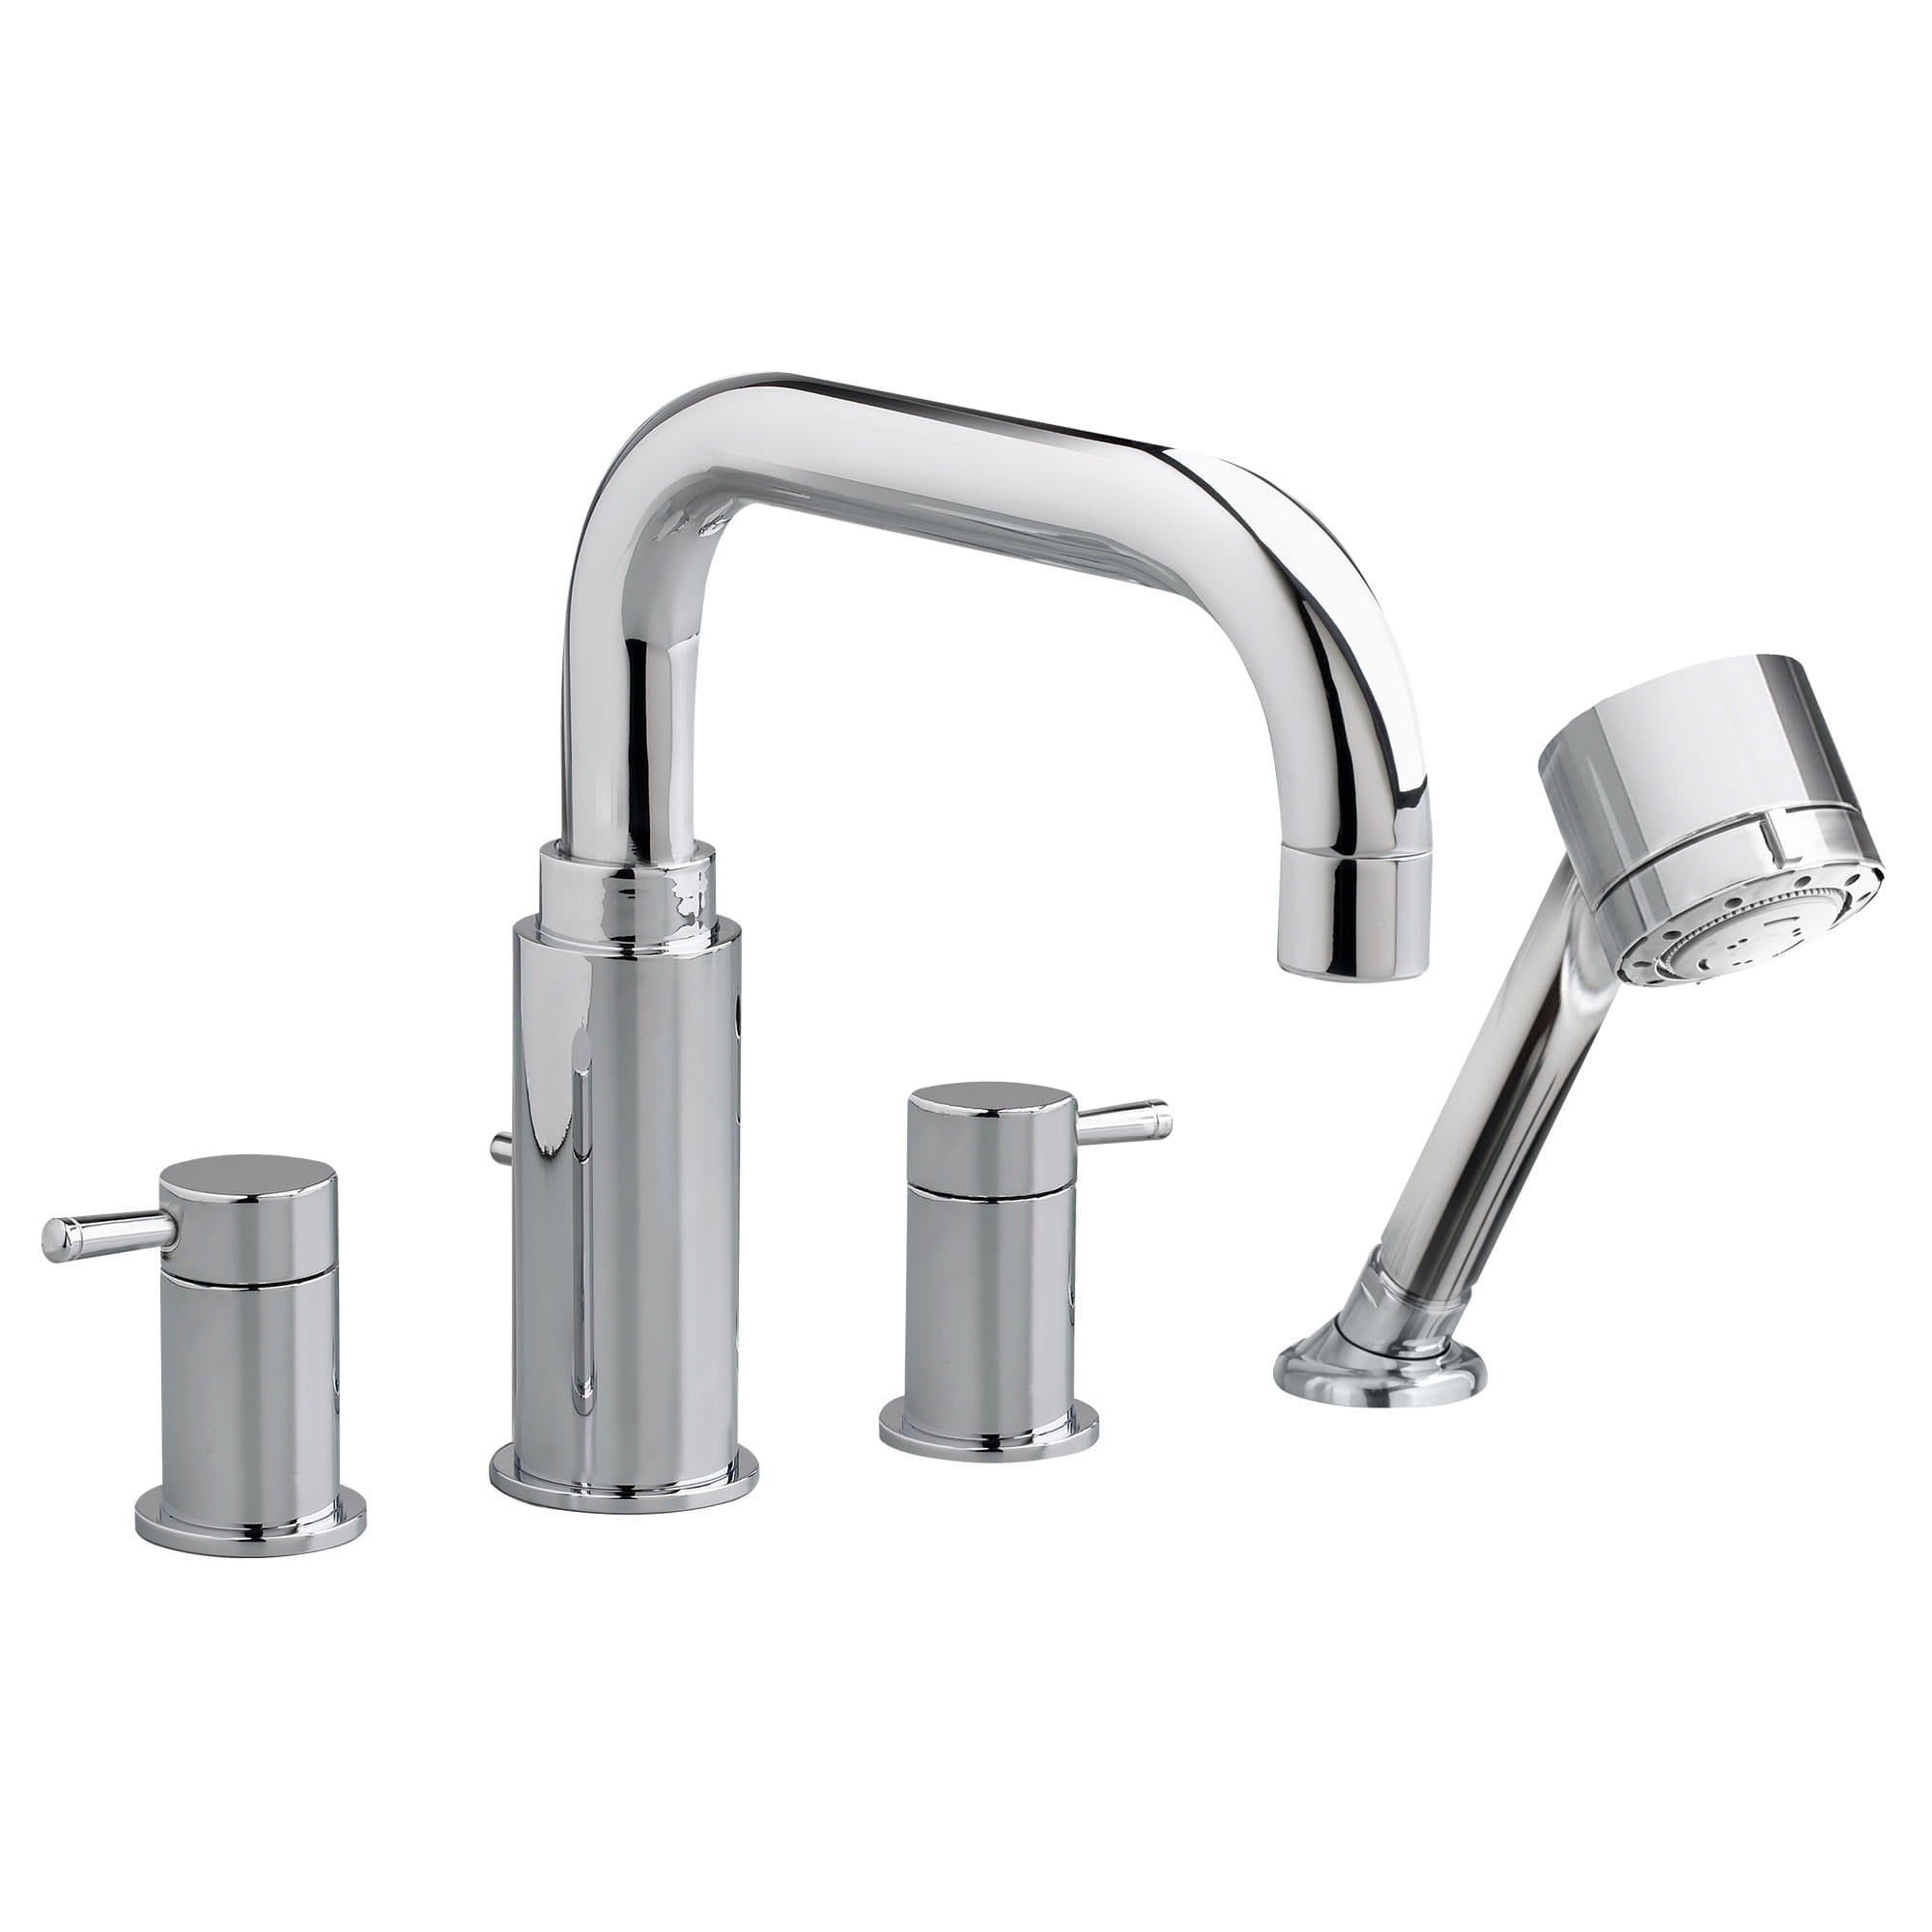 Serin® Bathtub Faucet With Lever Handles and Personal Shower for Flash® Rough-In Valve